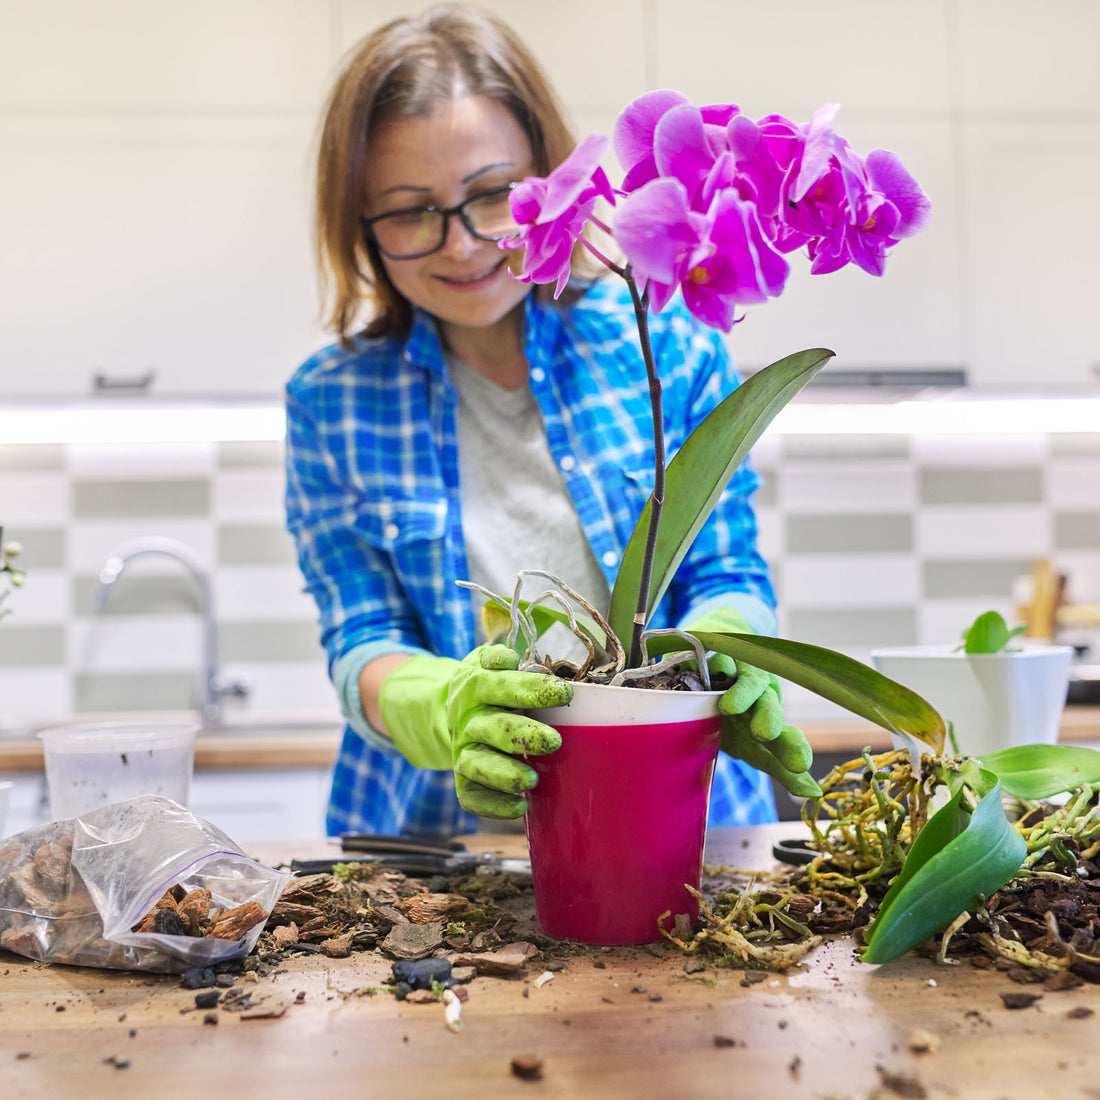 Growing Orchids with Organic Fertilizer: Nurturing Exquisite Blooms Sustainably